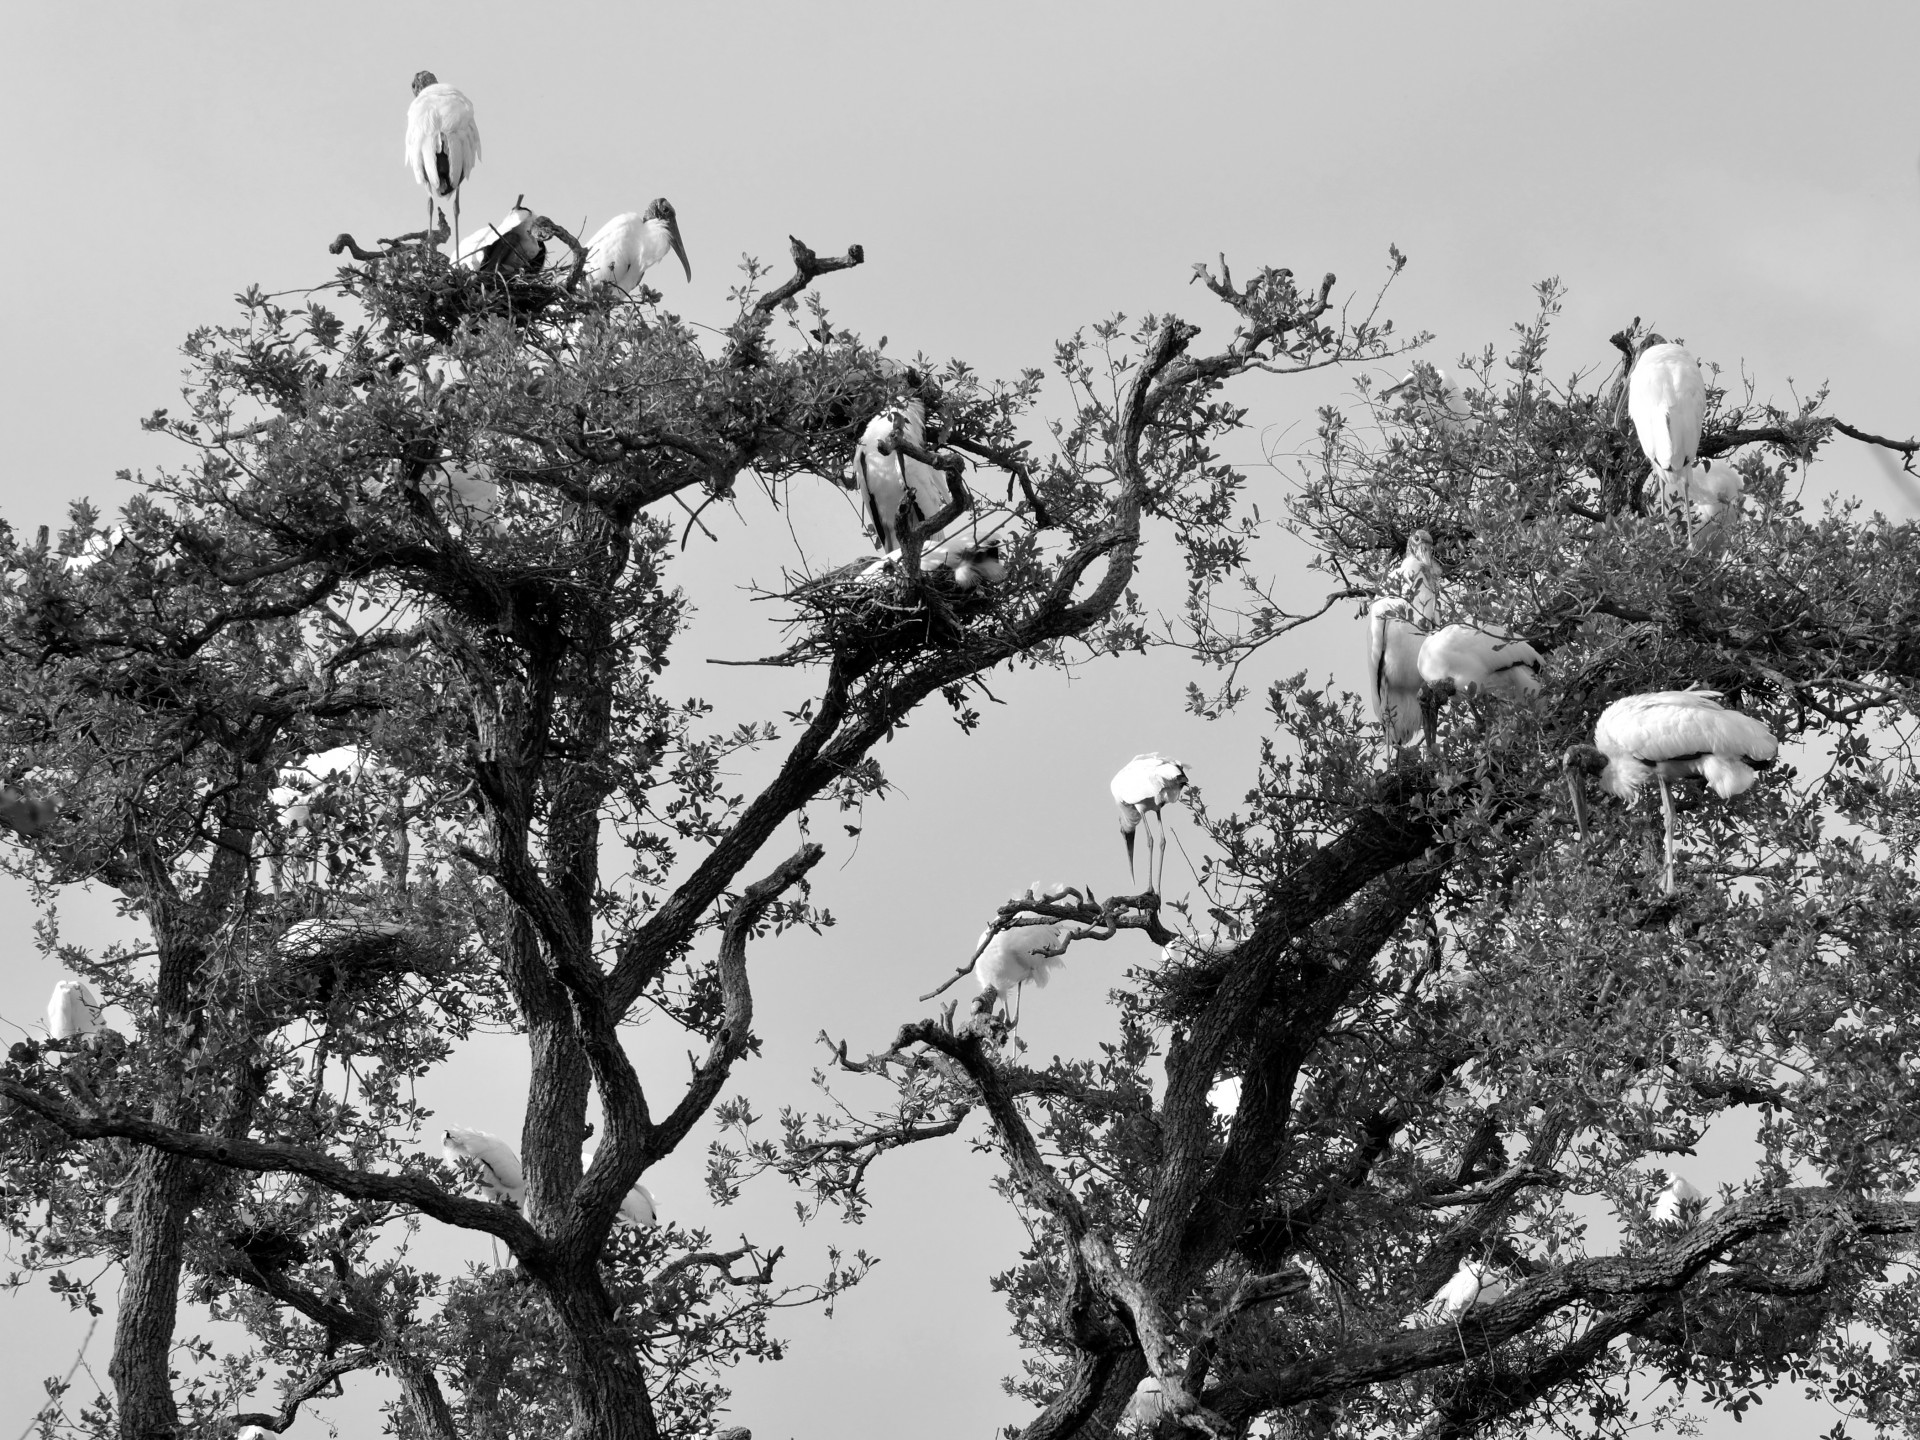 Wood Storks in the wild nesting black and white image